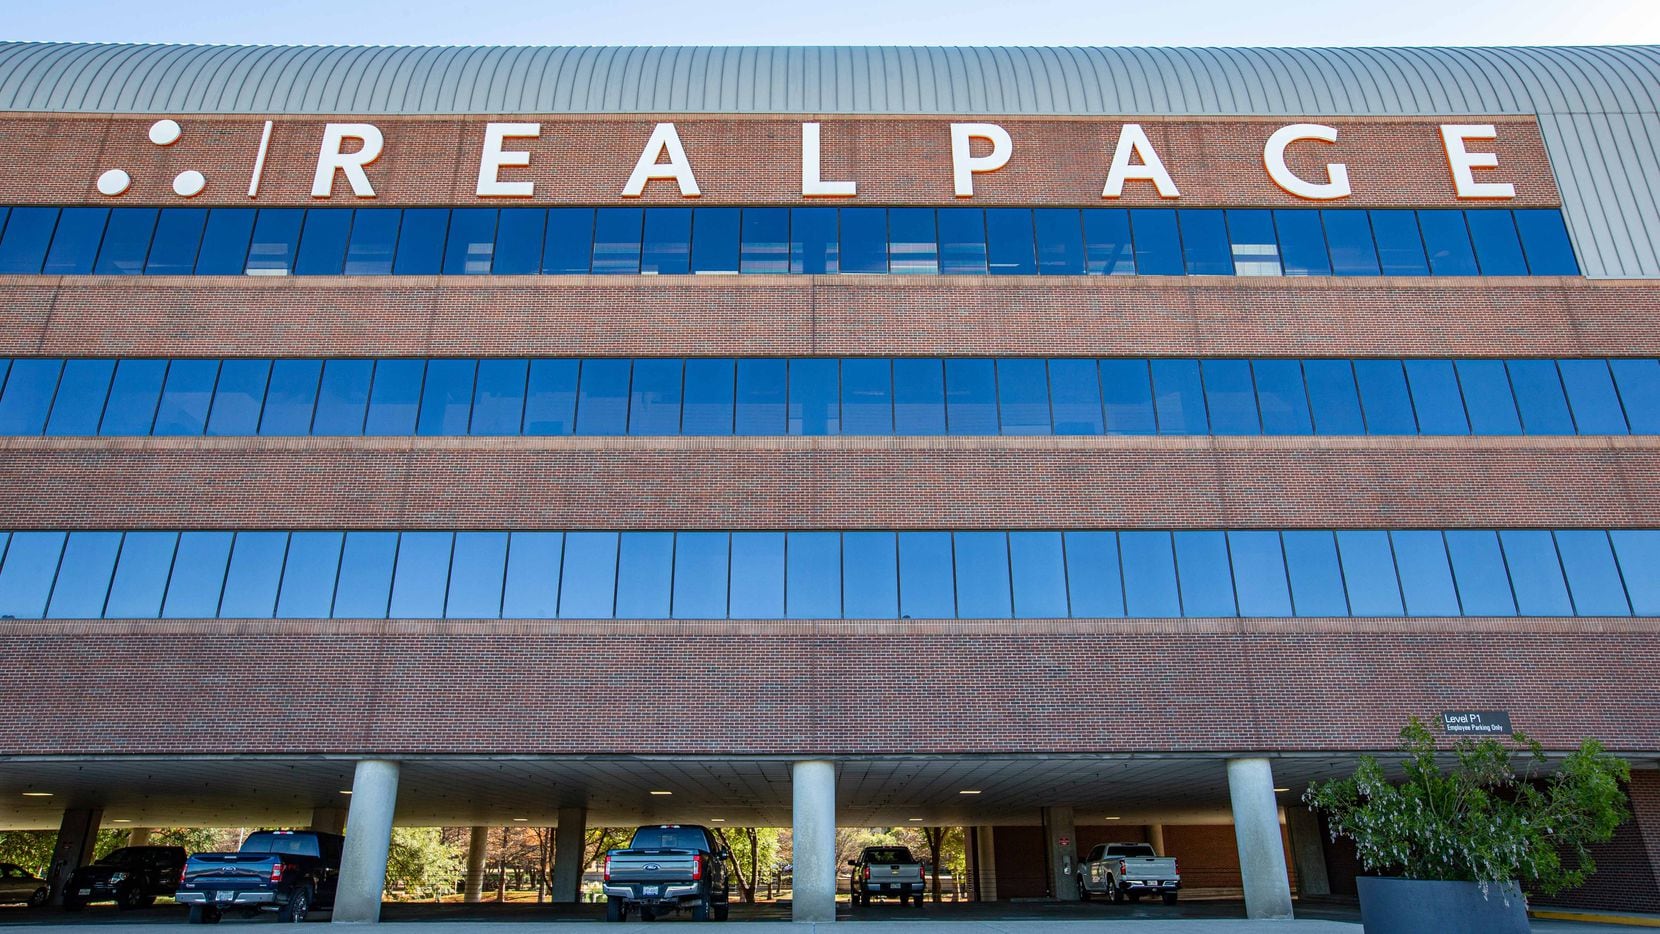 RealPage's headquarters in Richardson are shown on Monday.